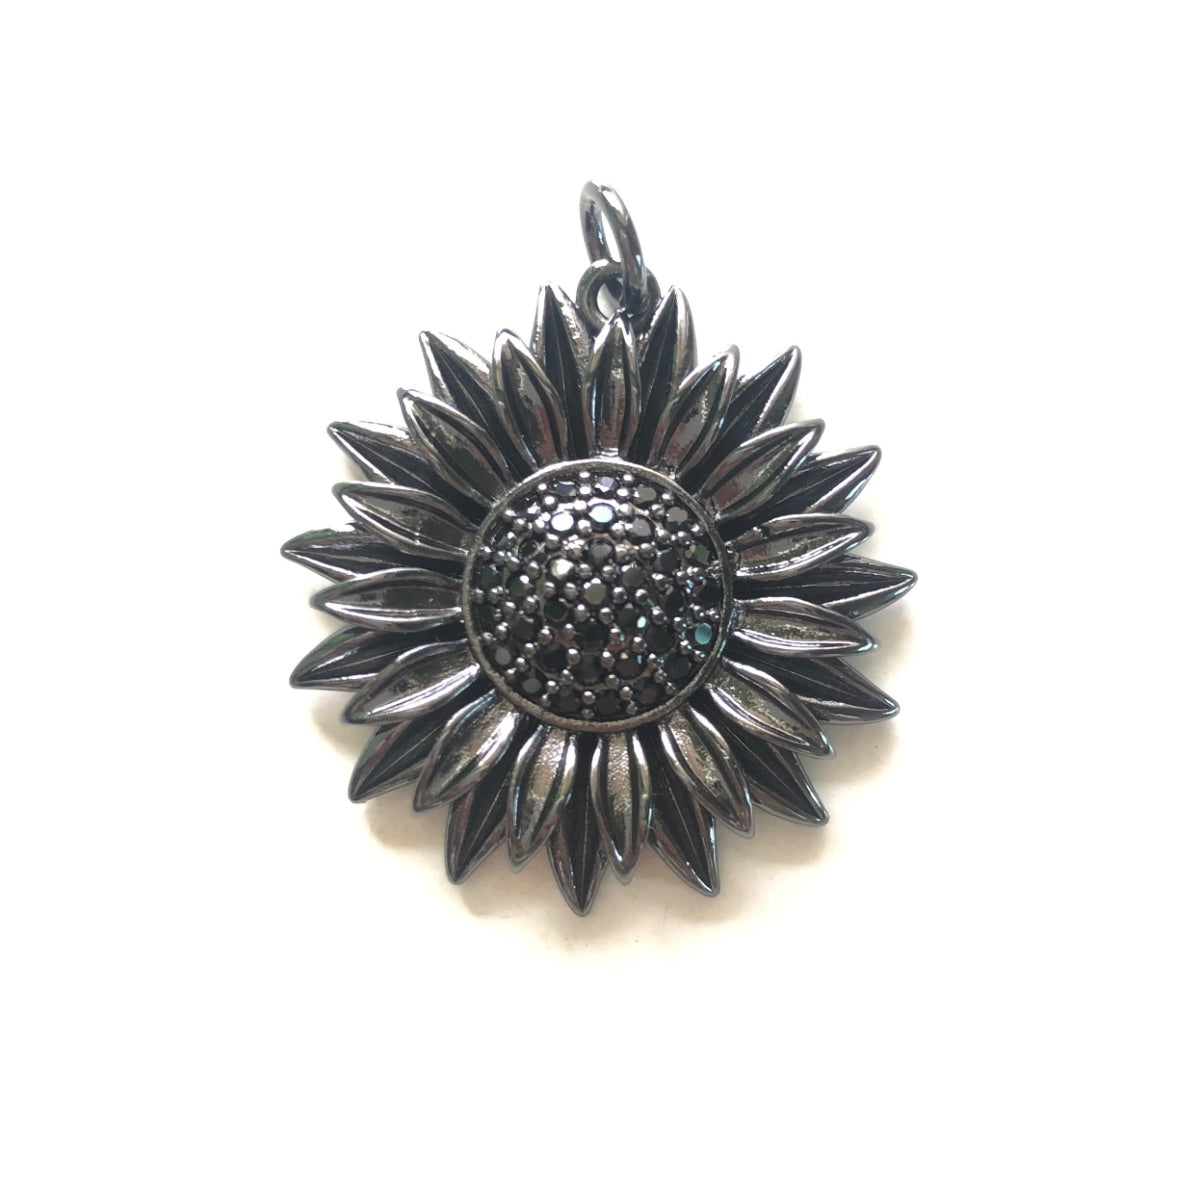 10pcs/lot 29mm CZ Paved Sunflower Charms CZ Paved Charms Flowers Charms Beads Beyond